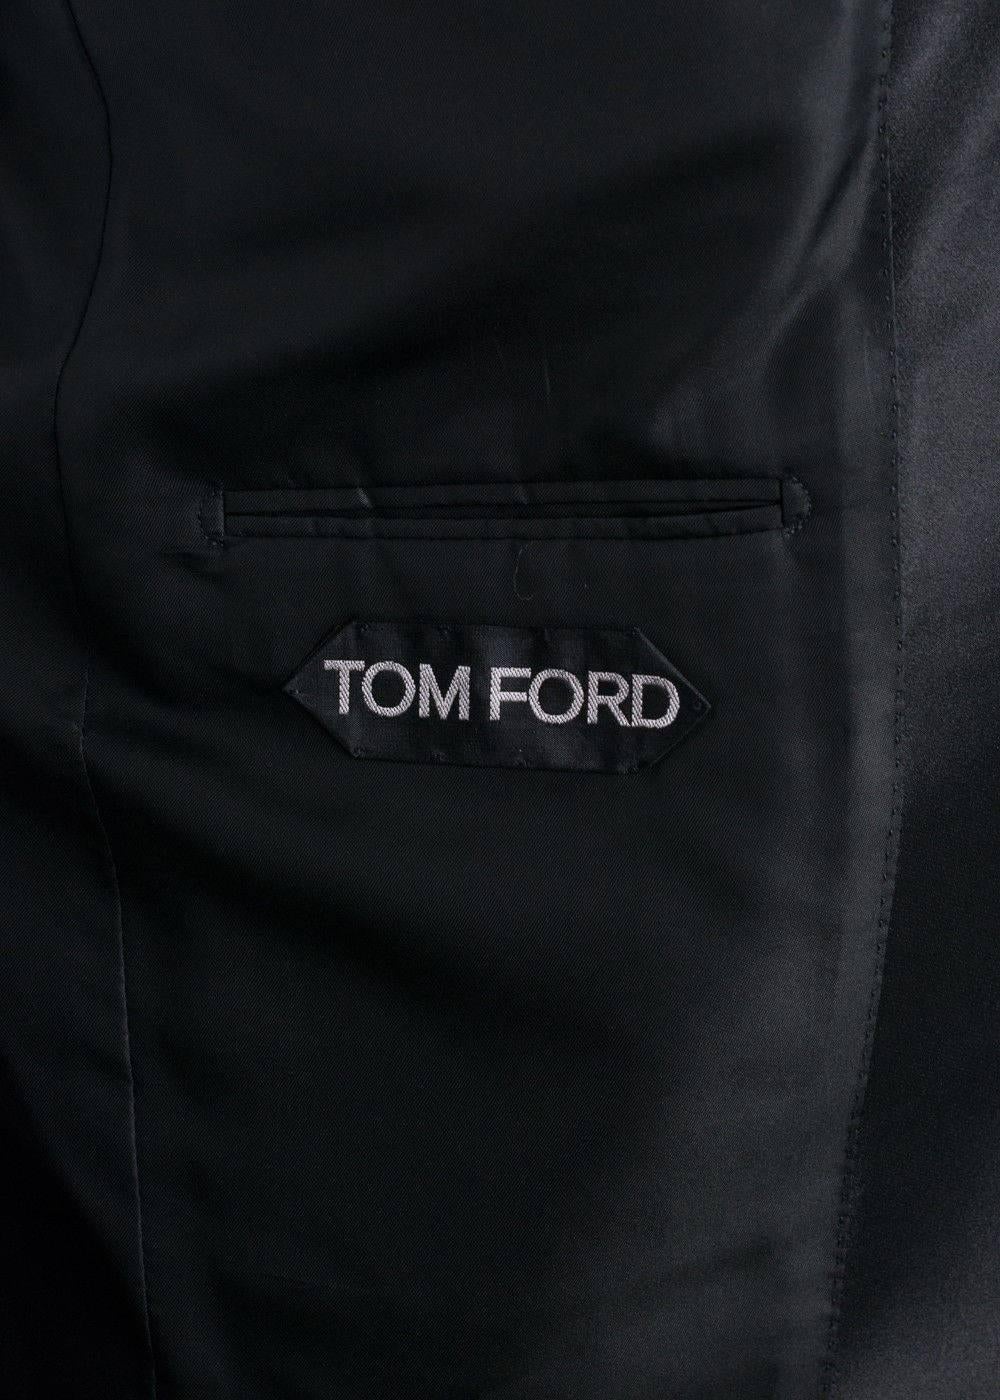 tom ford connor